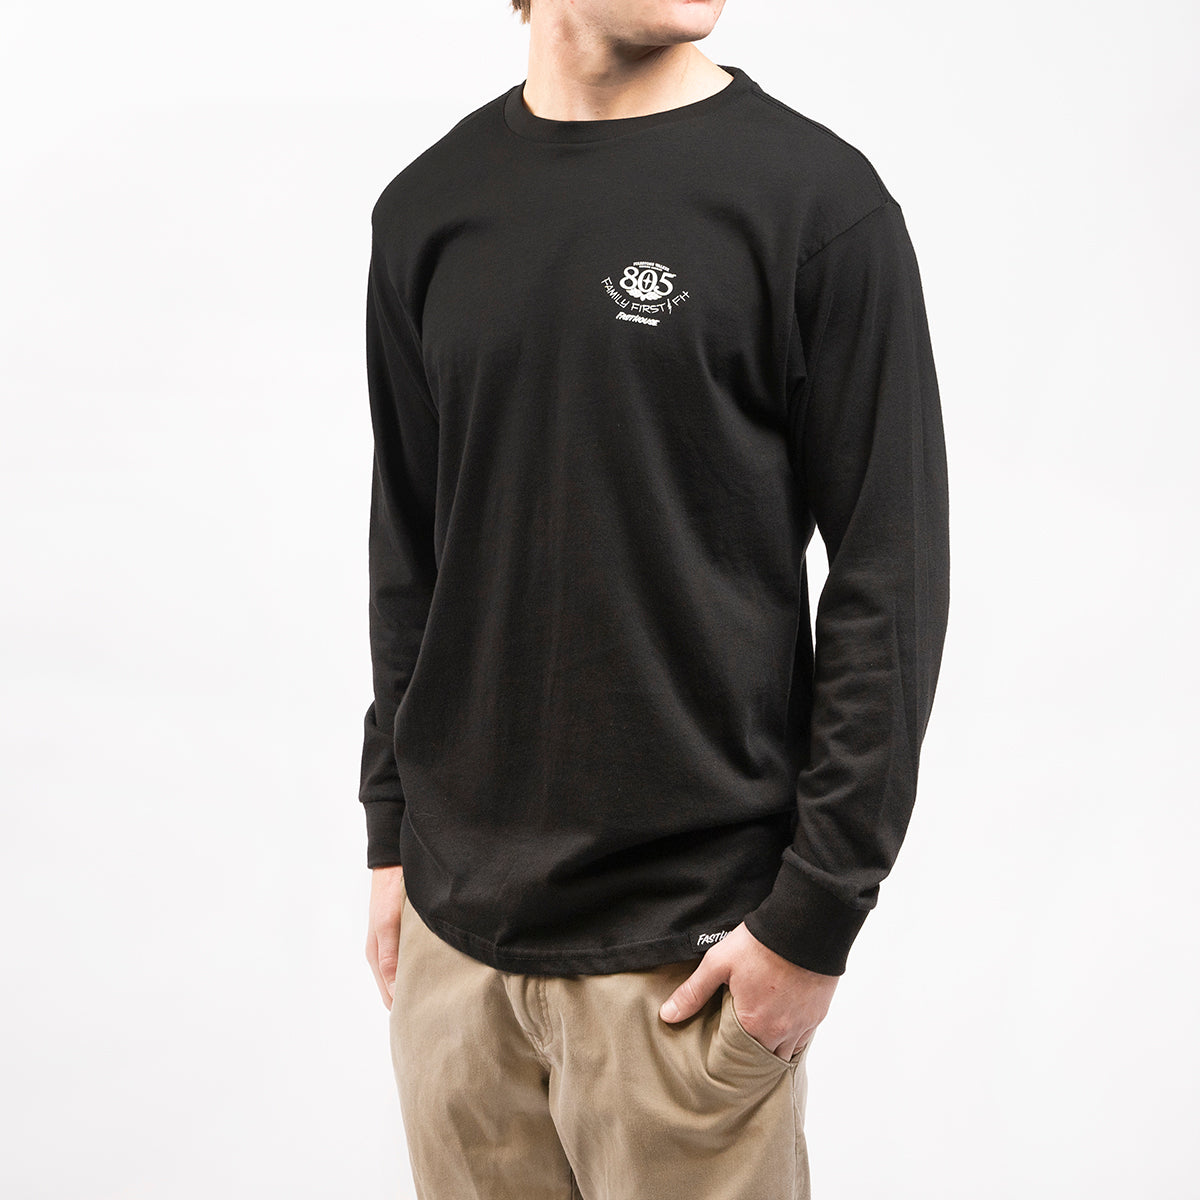 805 Family First Long Sleeve Tee - Black